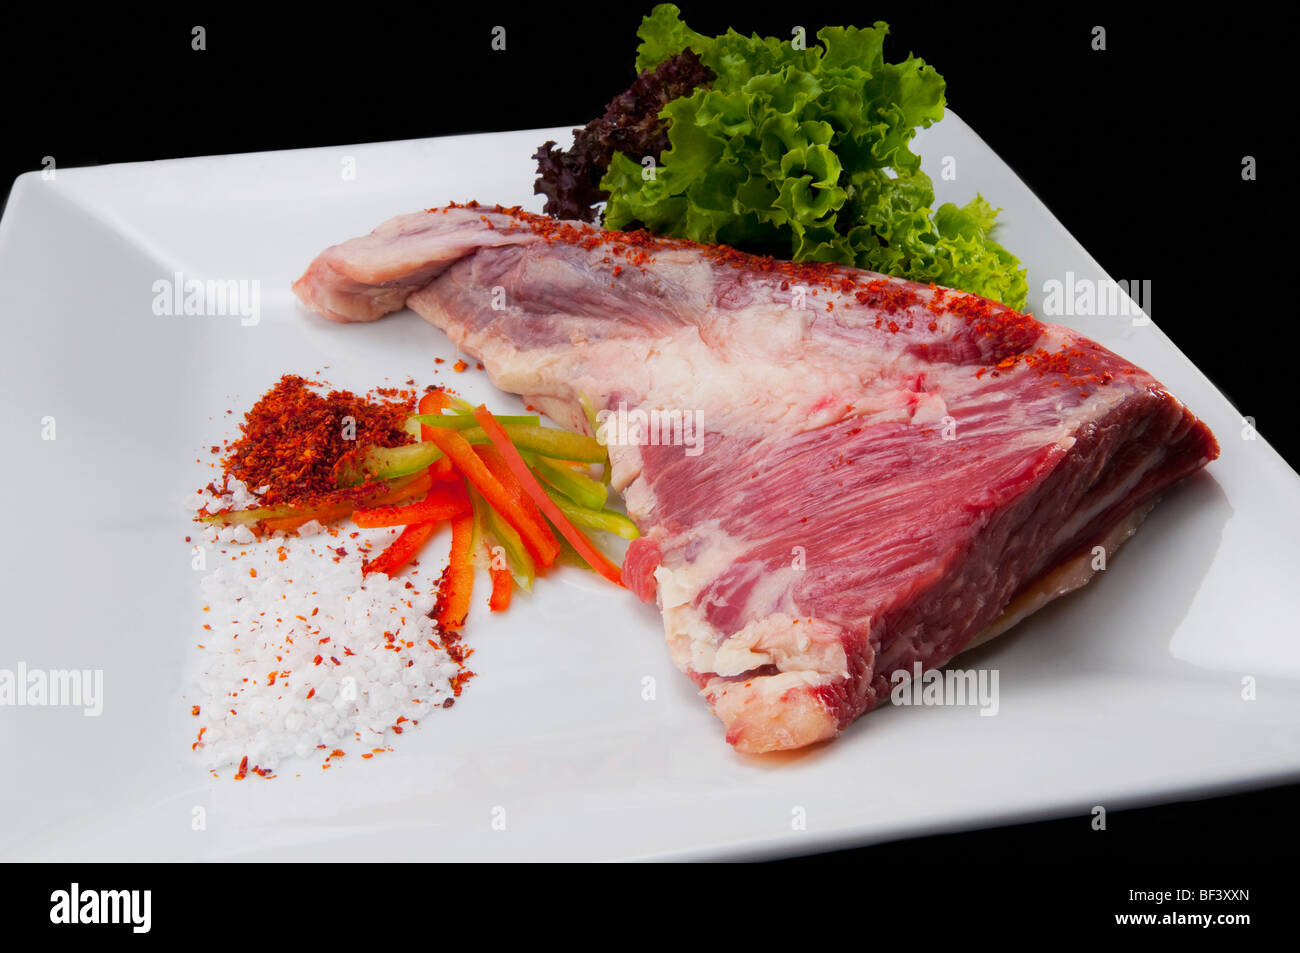 Close-up of a steak with ground red chilies and peppers Stock Photo